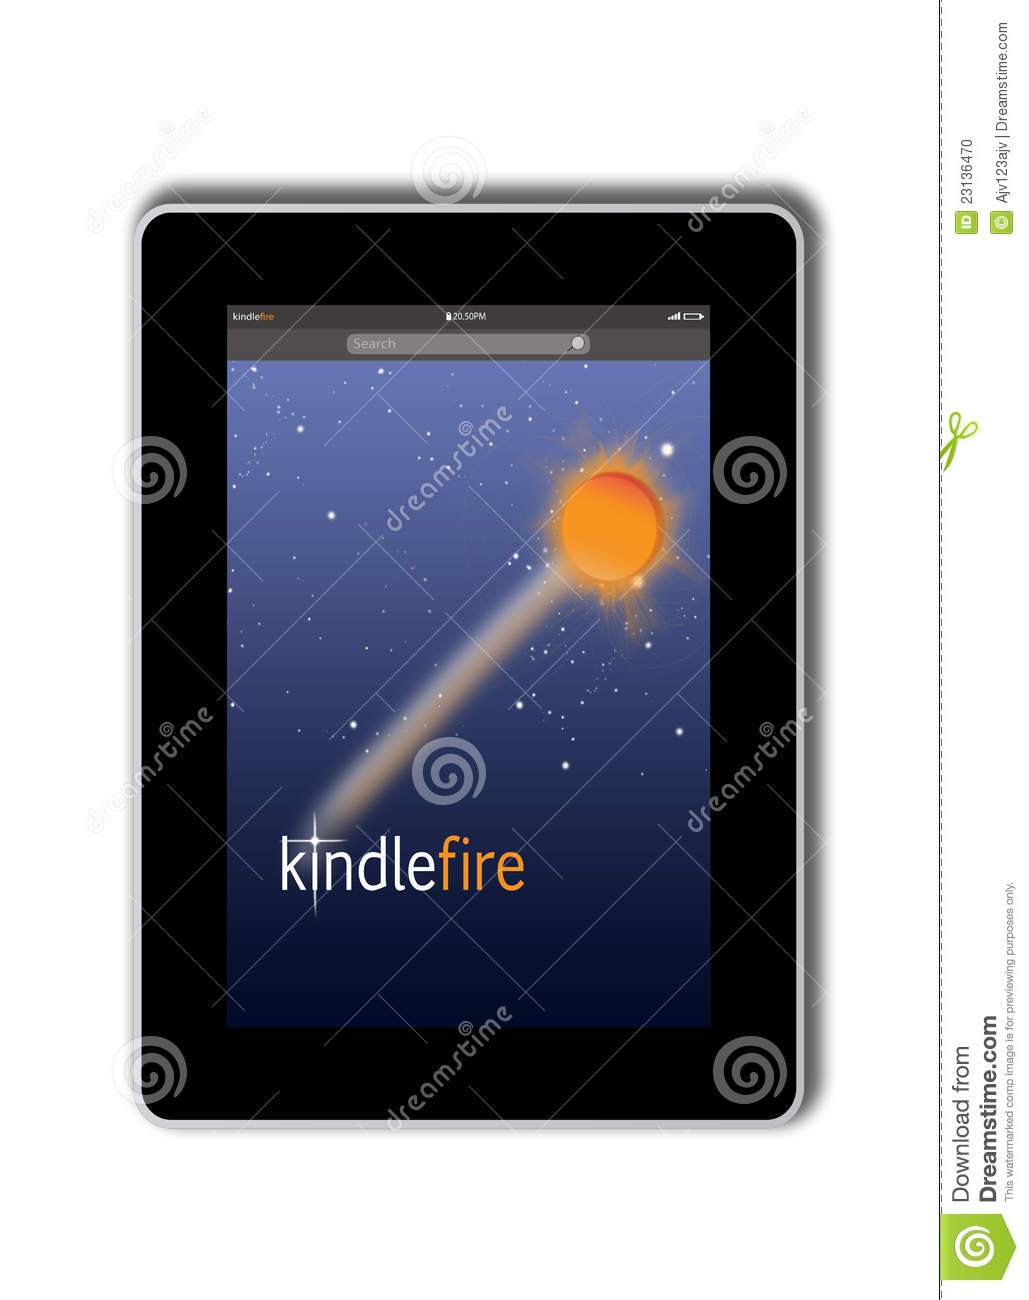 Amazon S New Version Of Kindle Called Kindle Fire Amazon Introduced